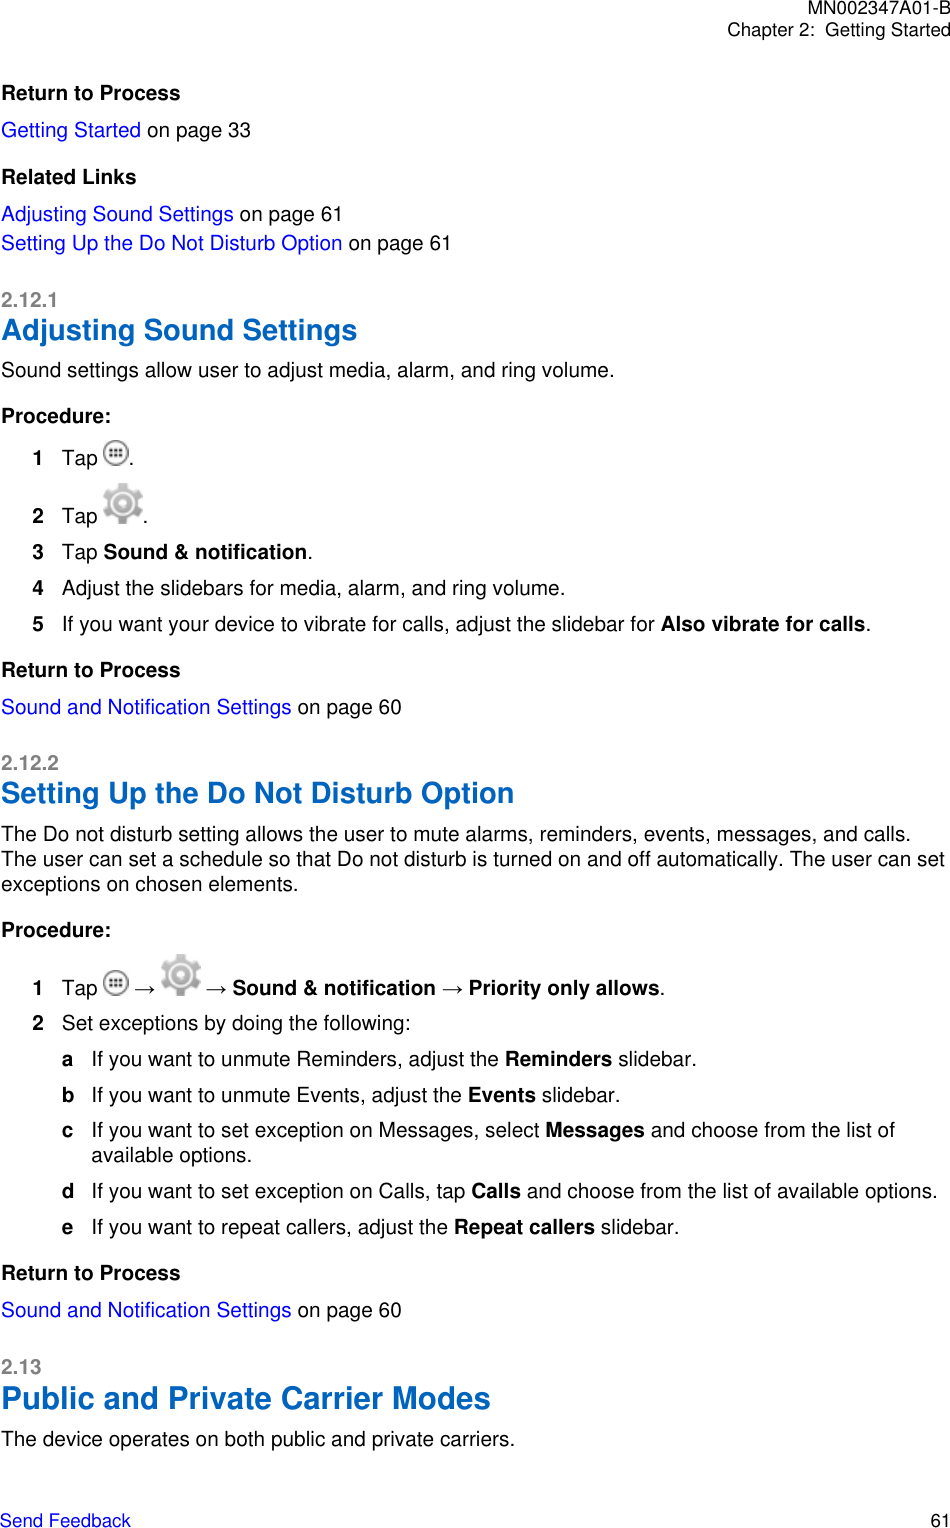 Return to ProcessGetting Started on page 33Related LinksAdjusting Sound Settings on page 61Setting Up the Do Not Disturb Option on page 612.12.1Adjusting Sound SettingsSound settings allow user to adjust media, alarm, and ring volume.Procedure:1Tap  .2Tap  .3Tap Sound &amp; notification.4Adjust the slidebars for media, alarm, and ring volume.5If you want your device to vibrate for calls, adjust the slidebar for Also vibrate for calls.Return to ProcessSound and Notification Settings on page 602.12.2Setting Up the Do Not Disturb OptionThe Do not disturb setting allows the user to mute alarms, reminders, events, messages, and calls.The user can set a schedule so that Do not disturb is turned on and off automatically. The user can setexceptions on chosen elements.Procedure:1Tap   →   → Sound &amp; notification → Priority only allows.2Set exceptions by doing the following:aIf you want to unmute Reminders, adjust the Reminders slidebar.bIf you want to unmute Events, adjust the Events slidebar.cIf you want to set exception on Messages, select Messages and choose from the list ofavailable options.dIf you want to set exception on Calls, tap Calls and choose from the list of available options.eIf you want to repeat callers, adjust the Repeat callers slidebar.Return to ProcessSound and Notification Settings on page 602.13Public and Private Carrier ModesThe device operates on both public and private carriers.MN002347A01-BChapter 2:  Getting StartedSend Feedback   61